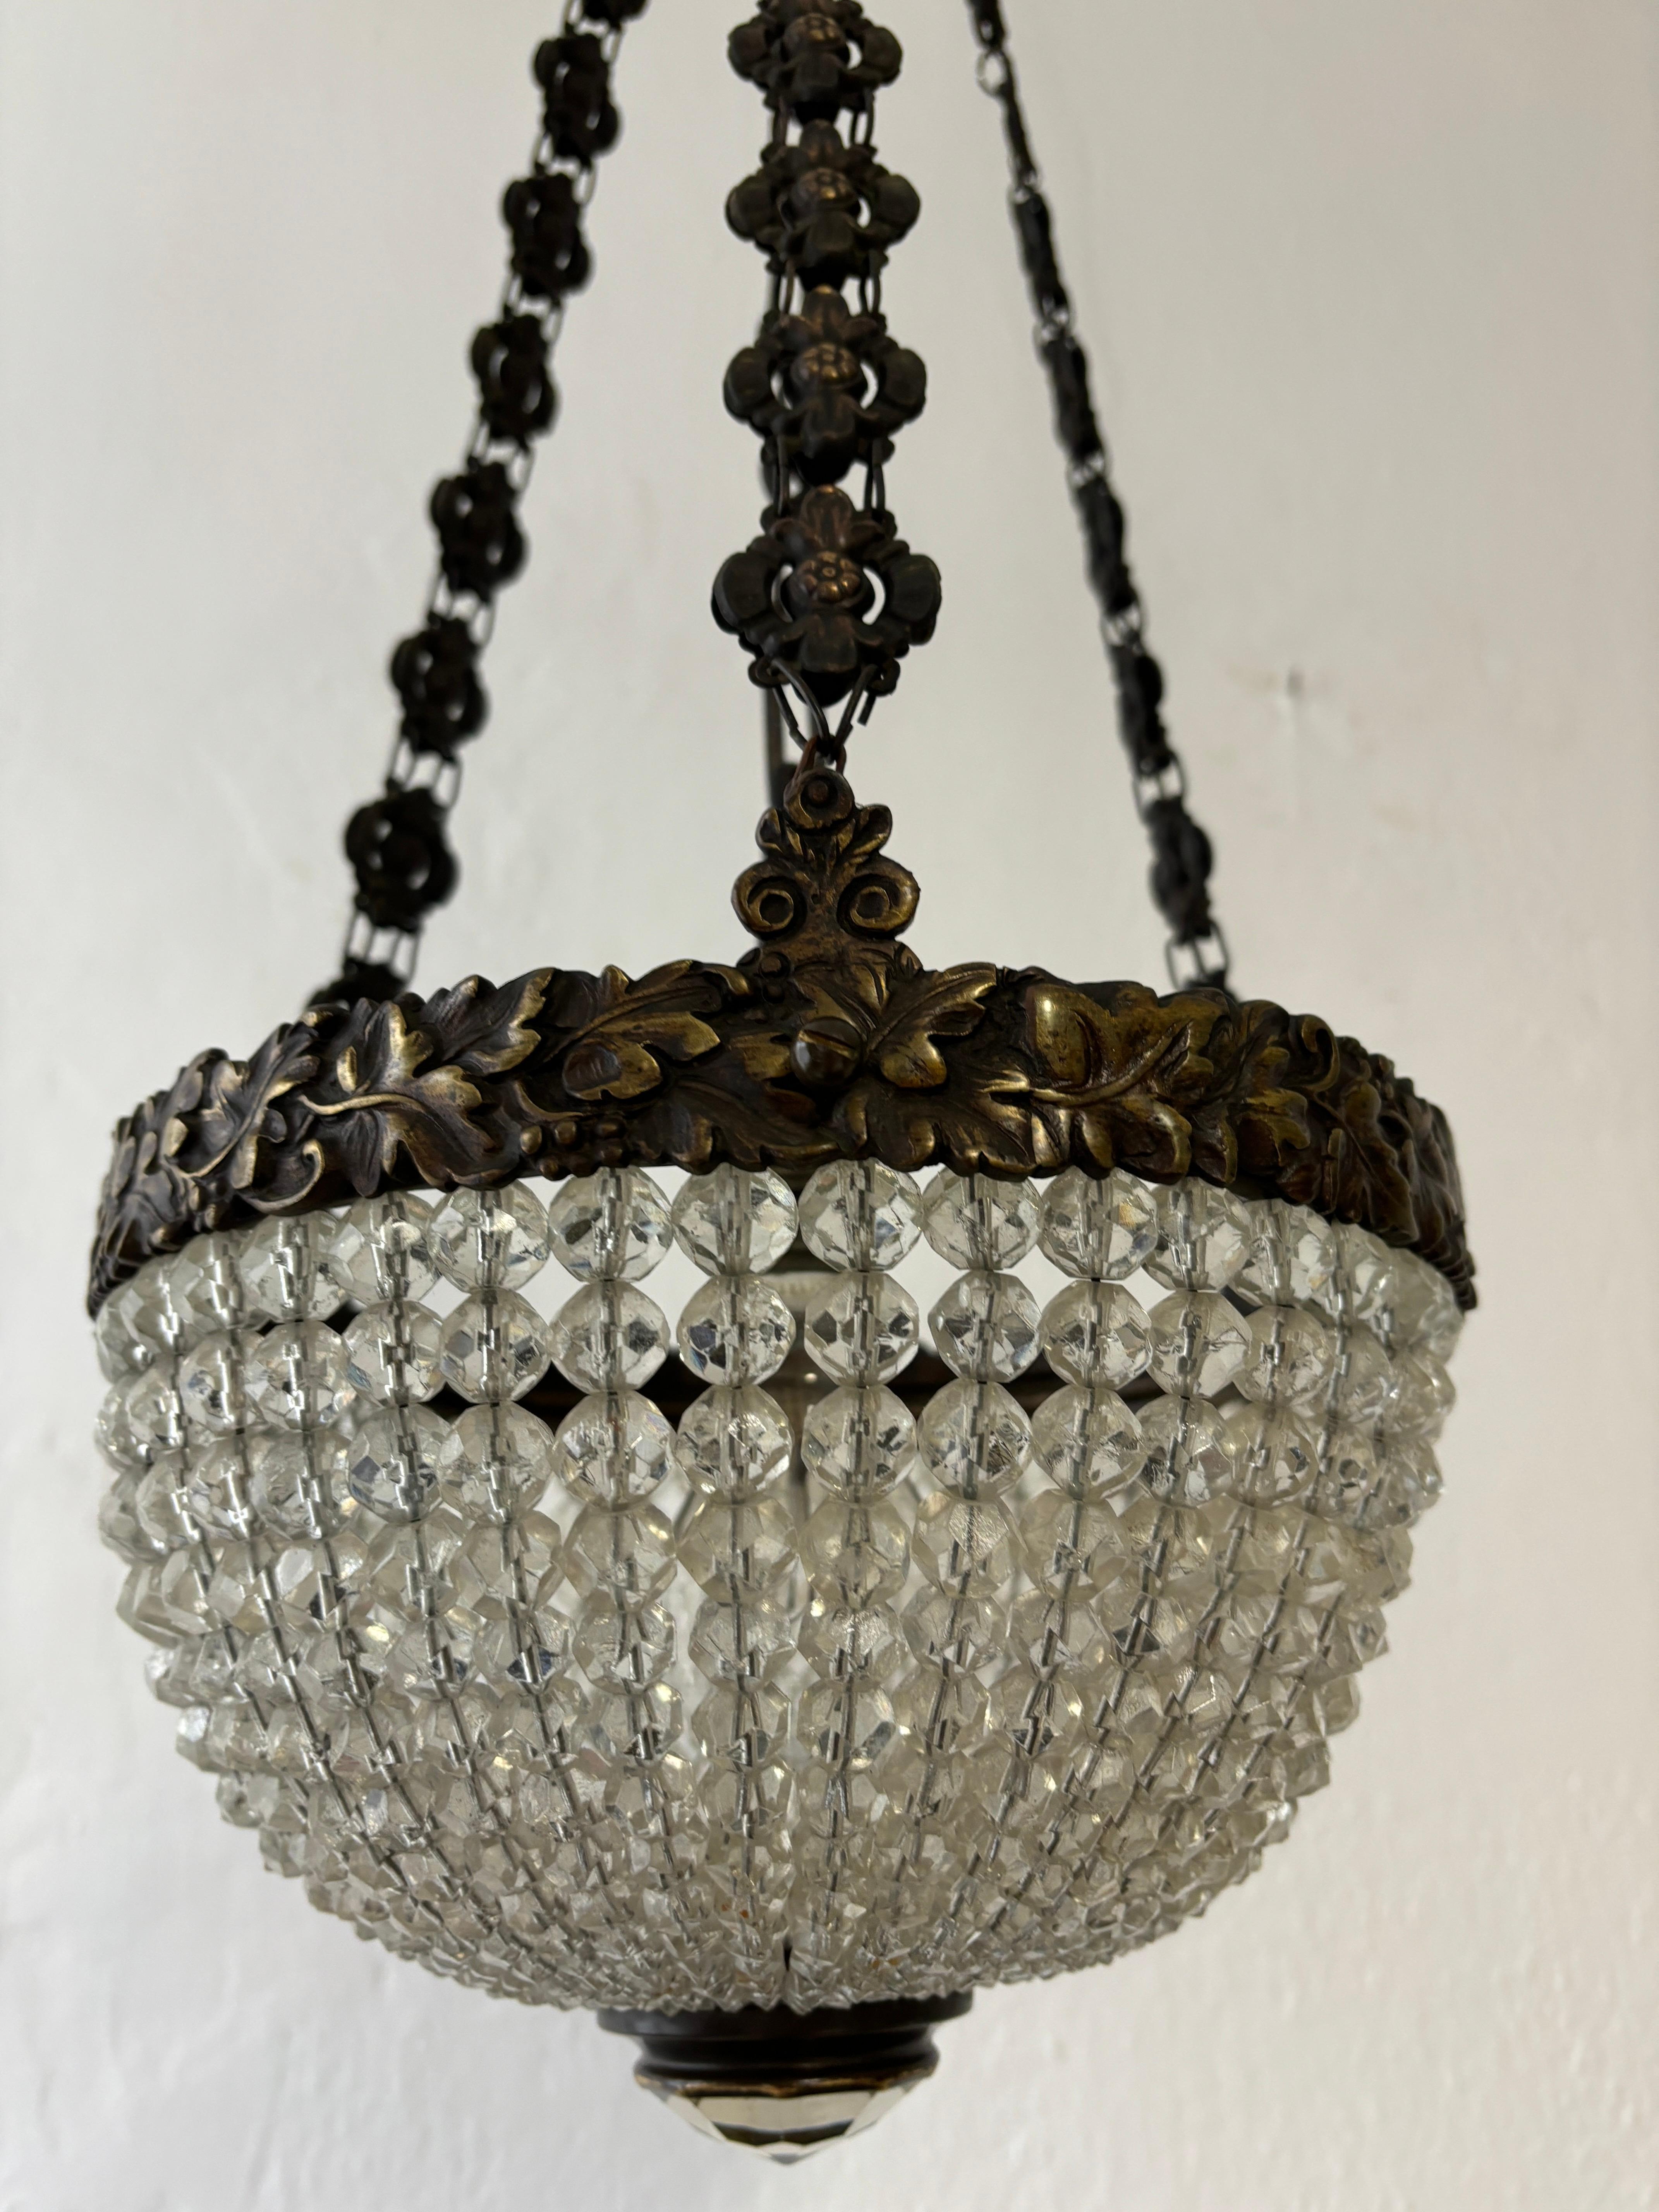 1900, French Bronze Crystal Beaded Empire Dome Chandelier Long Detailed Chain For Sale 5